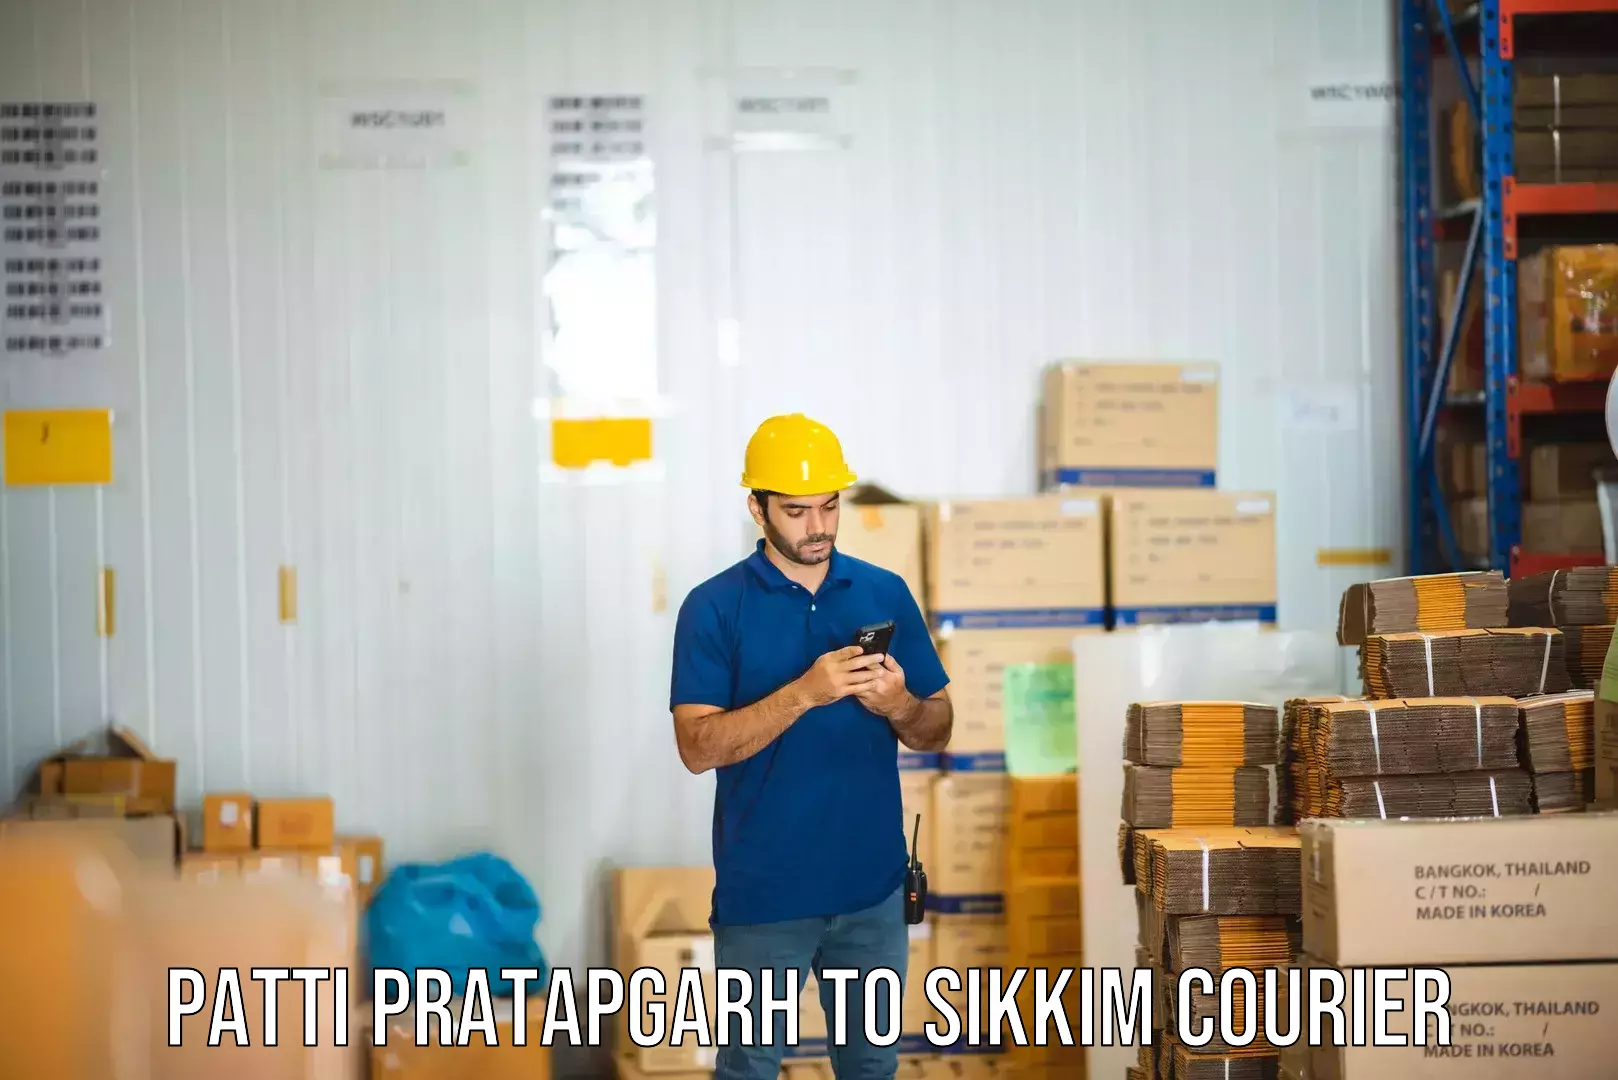 Reliable delivery network Patti Pratapgarh to South Sikkim